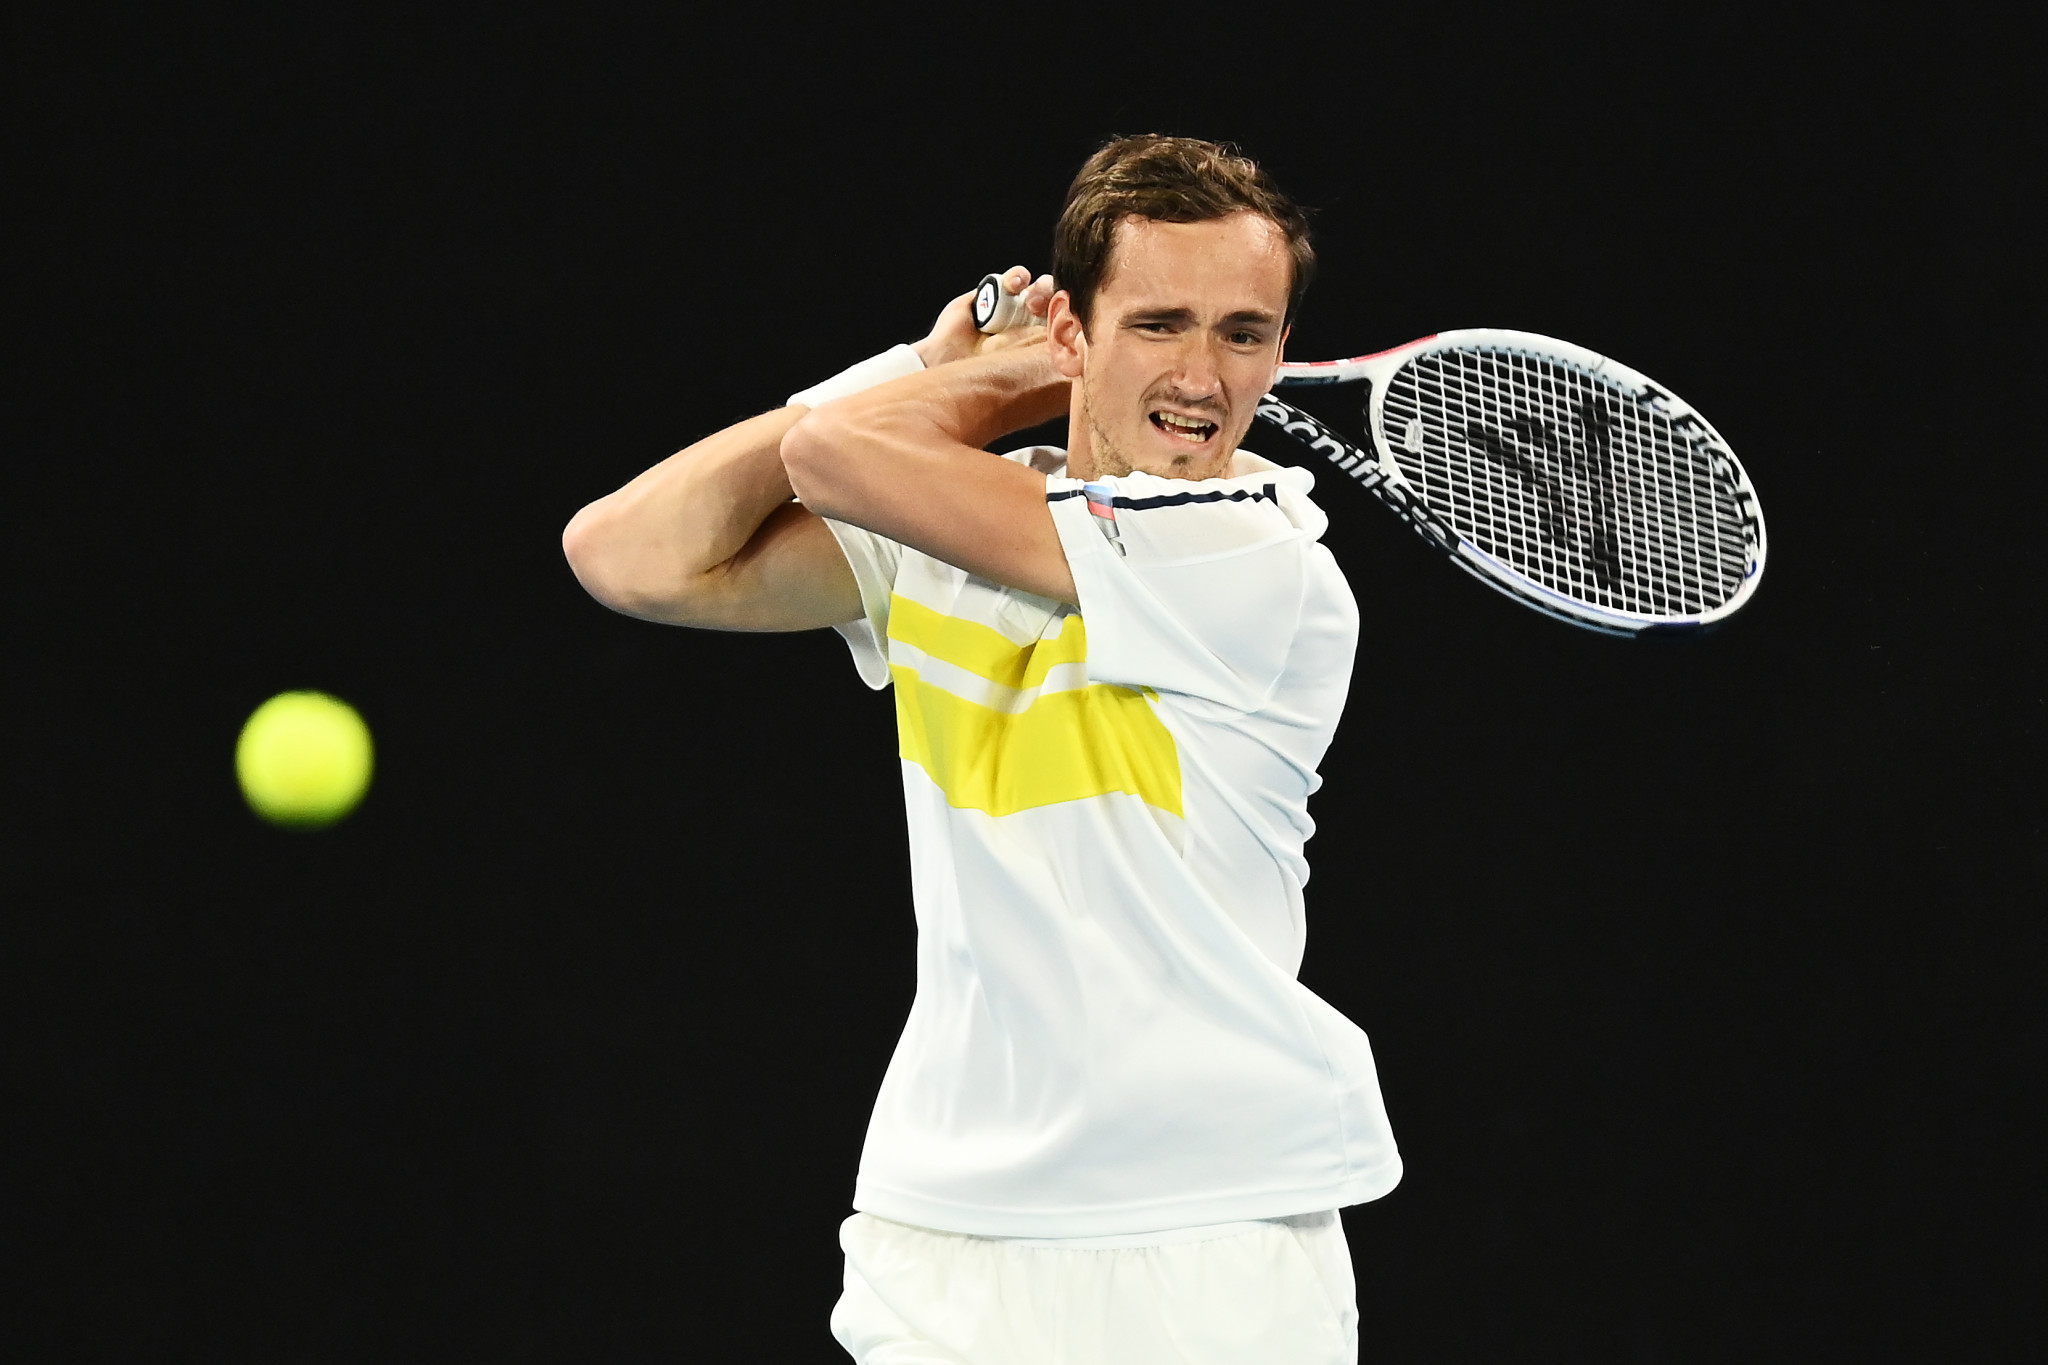 Russian fourth seed Daniil Medvedev was another straight sets winner in the second round in Melbourne ©Getty Images